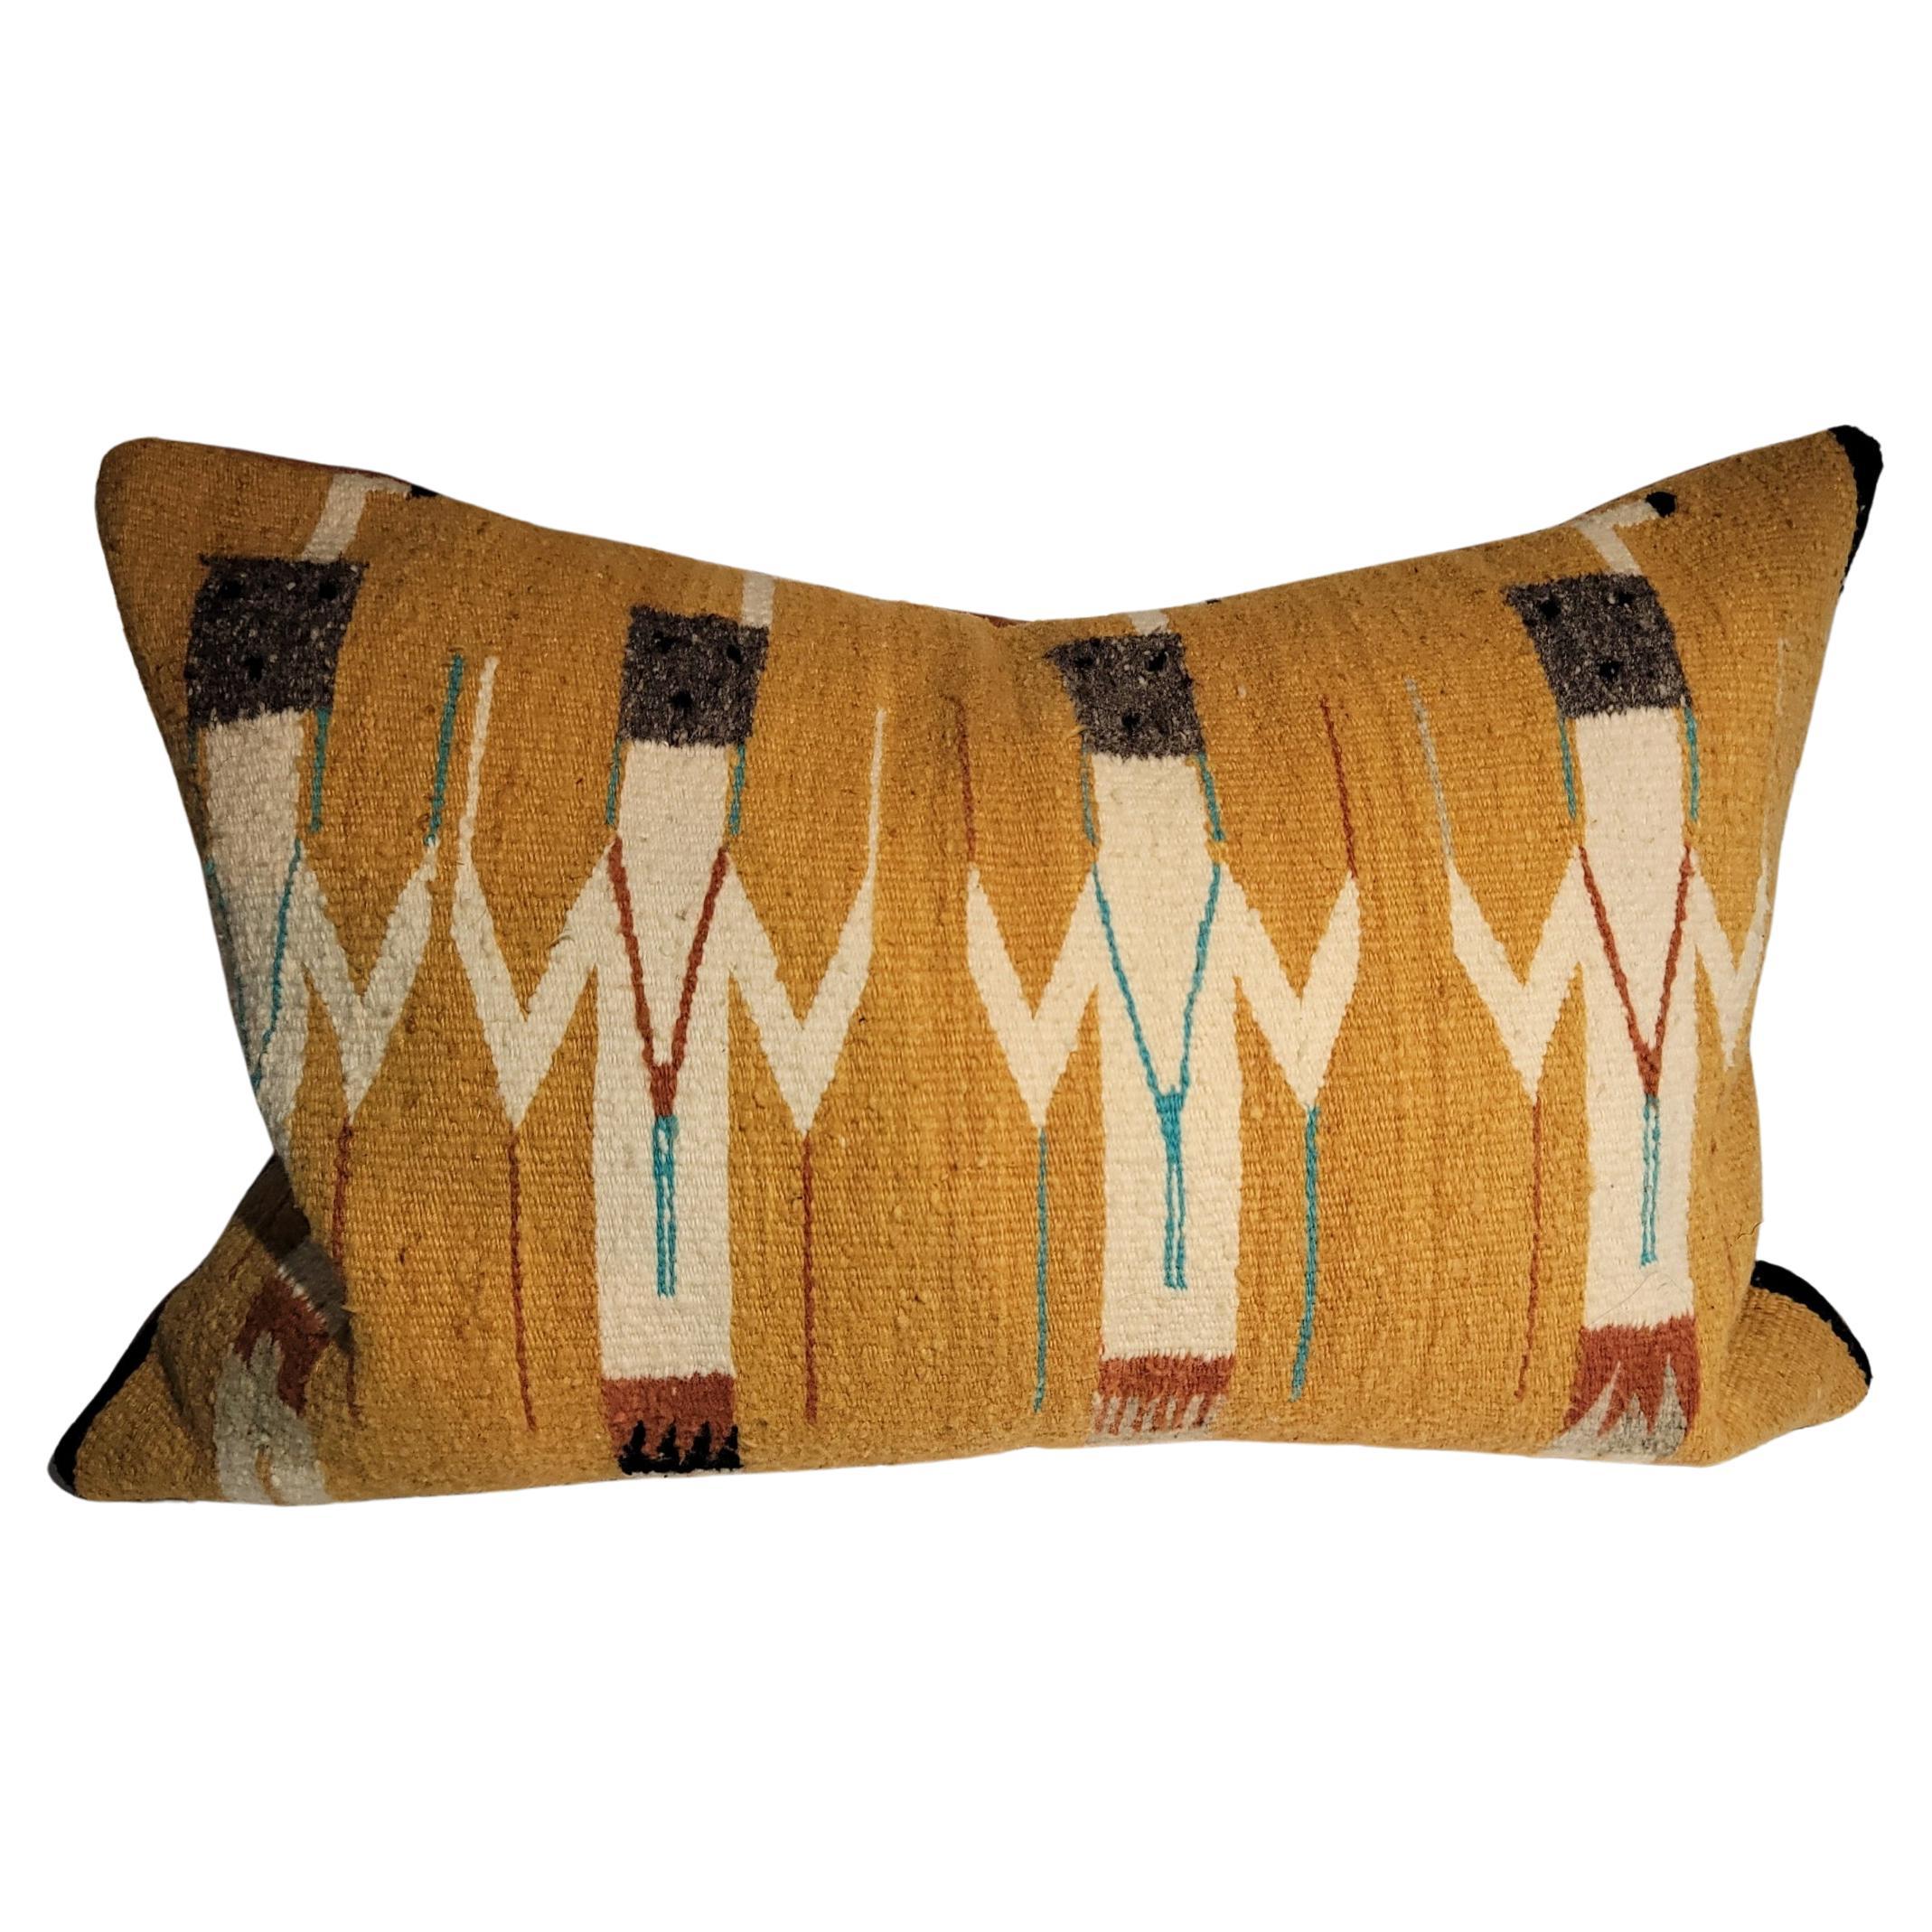 Yei Indian Weaving Pillow W/ Leather Back